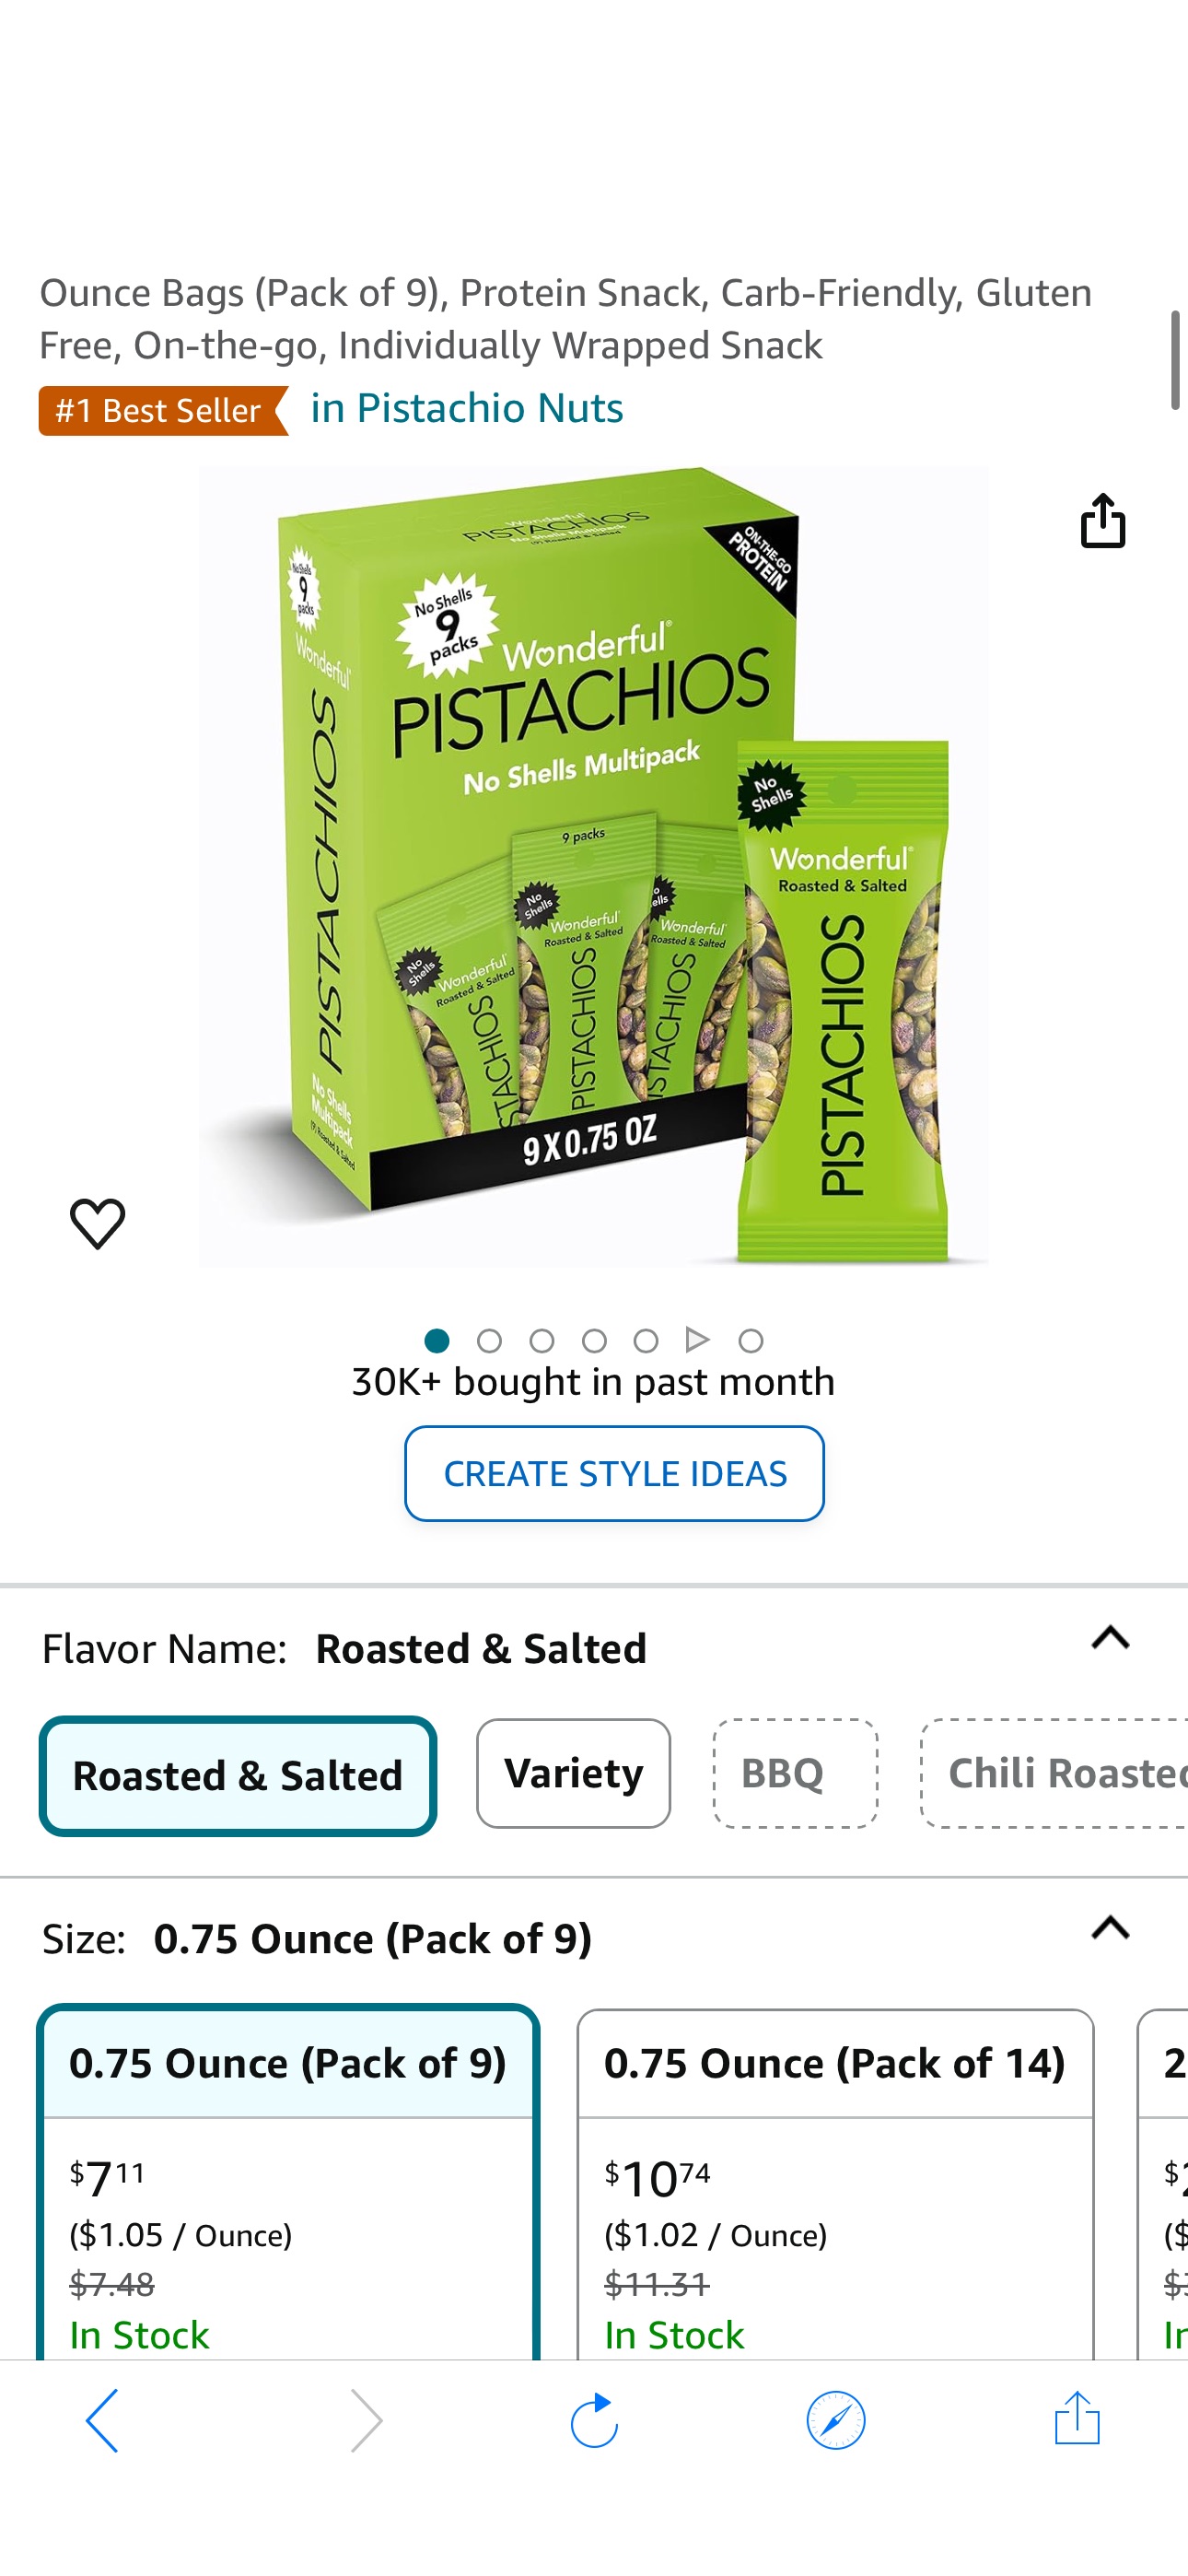 Amazon.com : Wonderful Pistachios No Shells, Roasted & Salted Nuts, 0.75 Ounce Bags (Pack of 9), Protein Snack, Carb-Friendly, Gluten Free, On-the-go, Individually Wrapped Snack : Grocery & Gourmet Fo